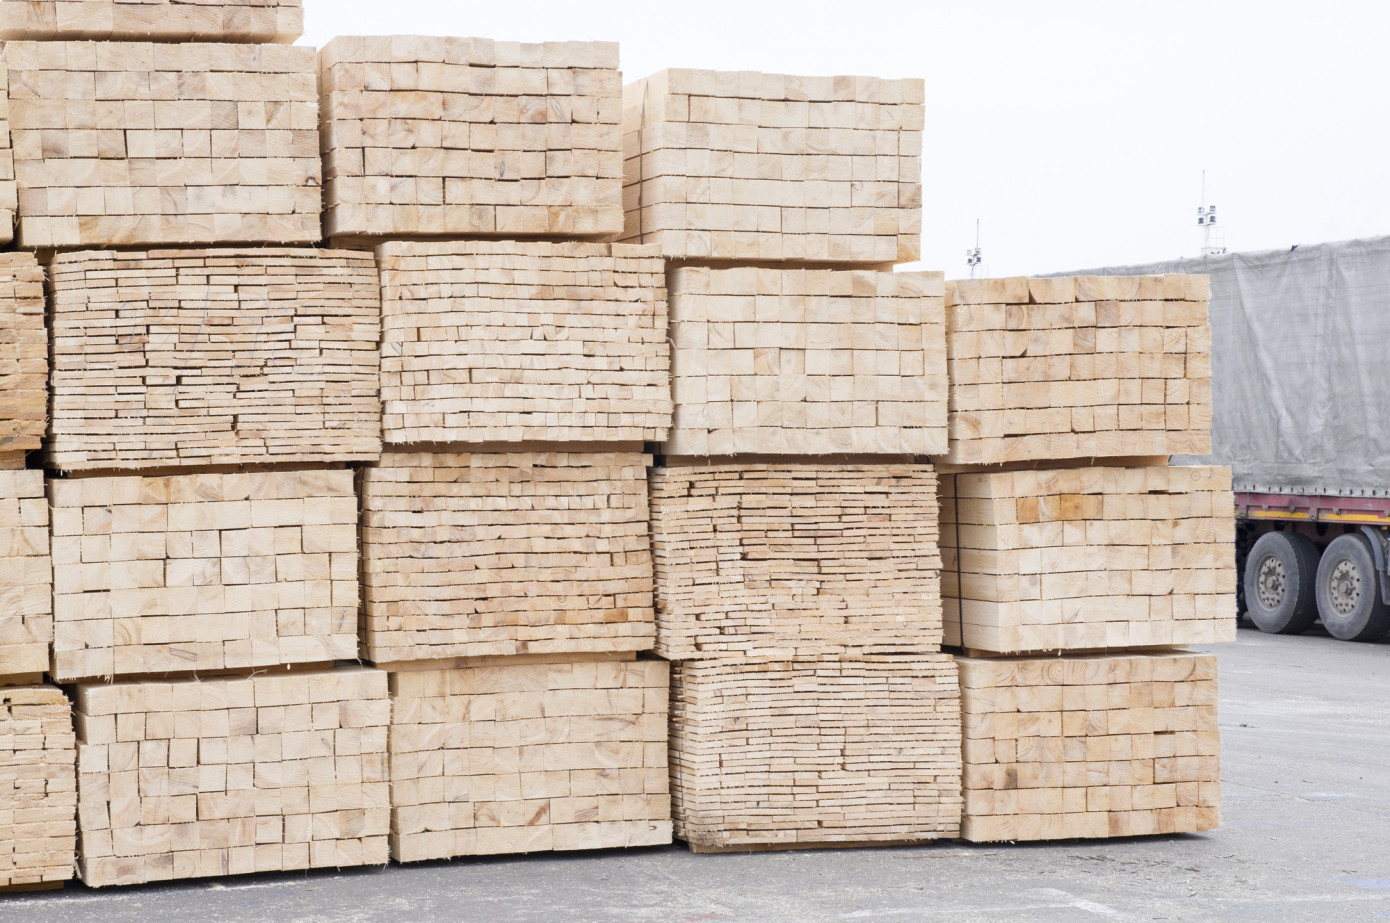 British Columbia government changes lumber regulations to boost domestic production